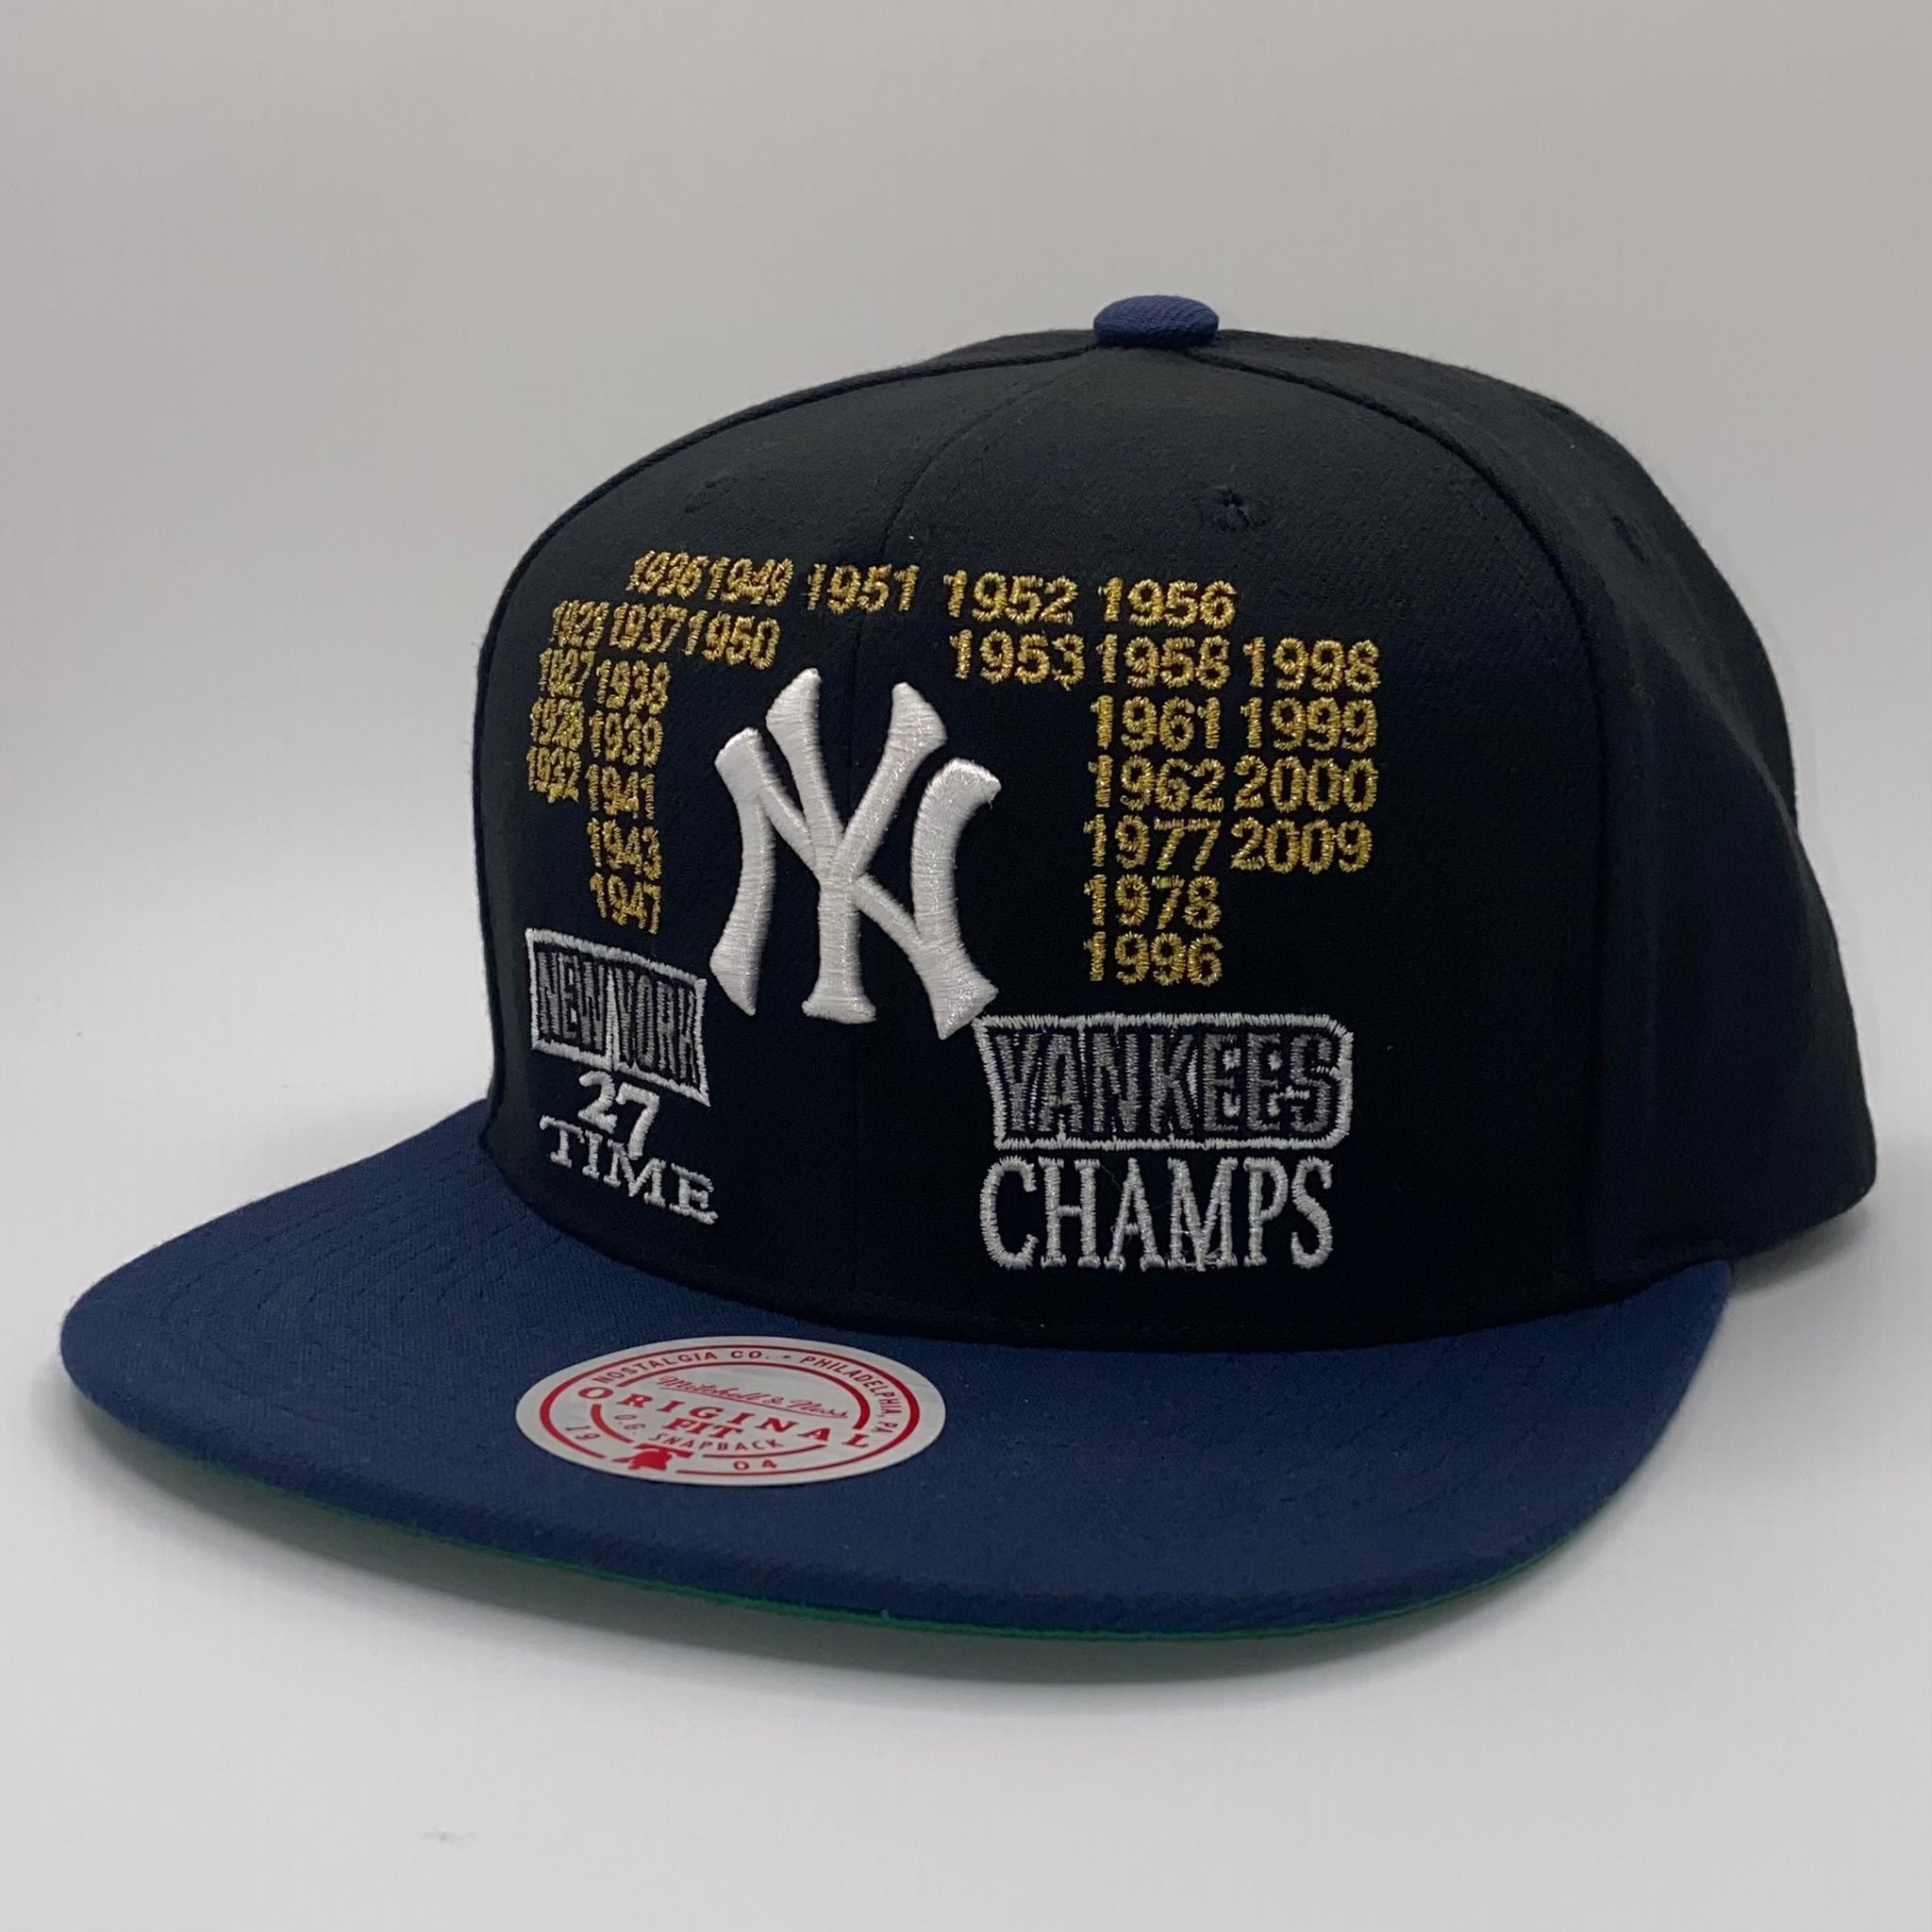 New York Yankees Mitchell & Ness "Champ Is Here" Snapback Hat